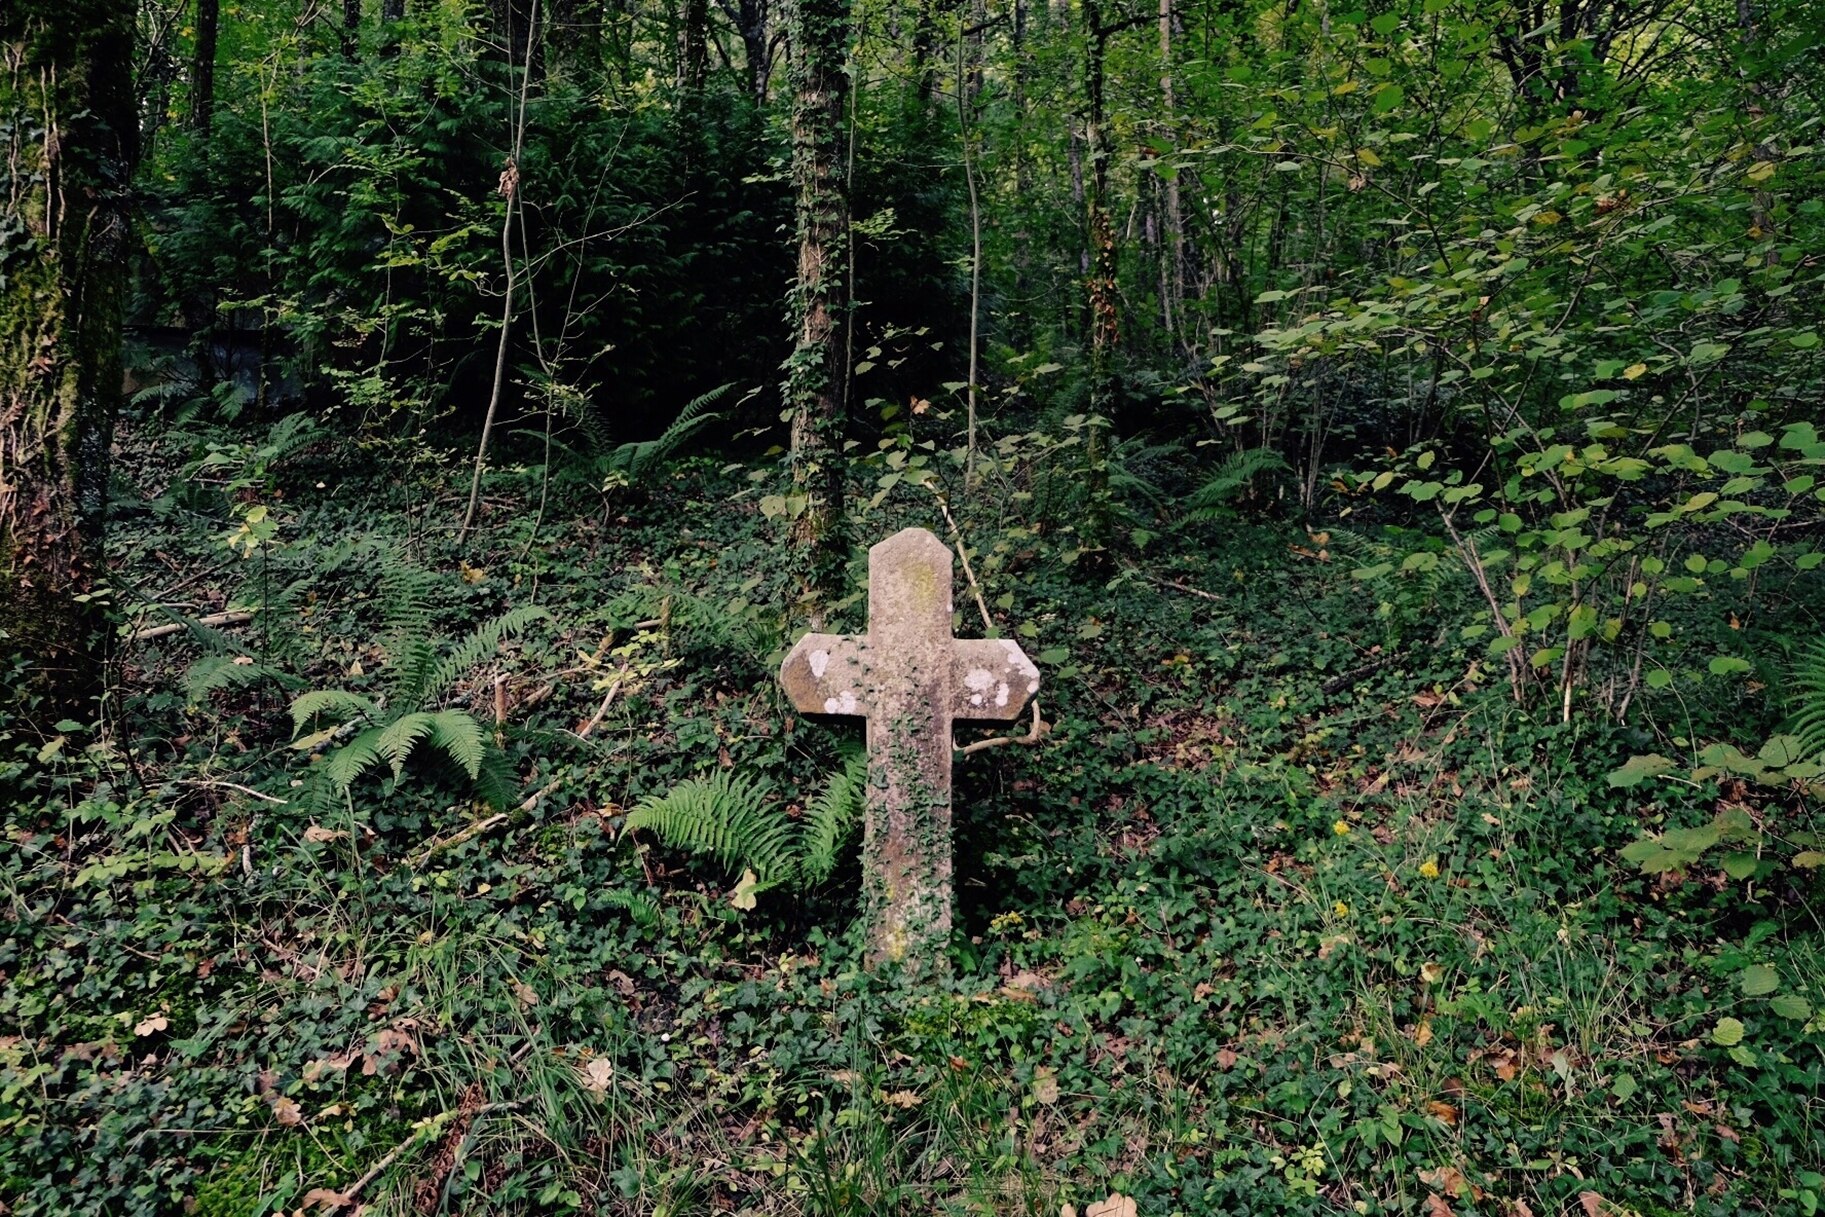 A Grave in a Wooded Area